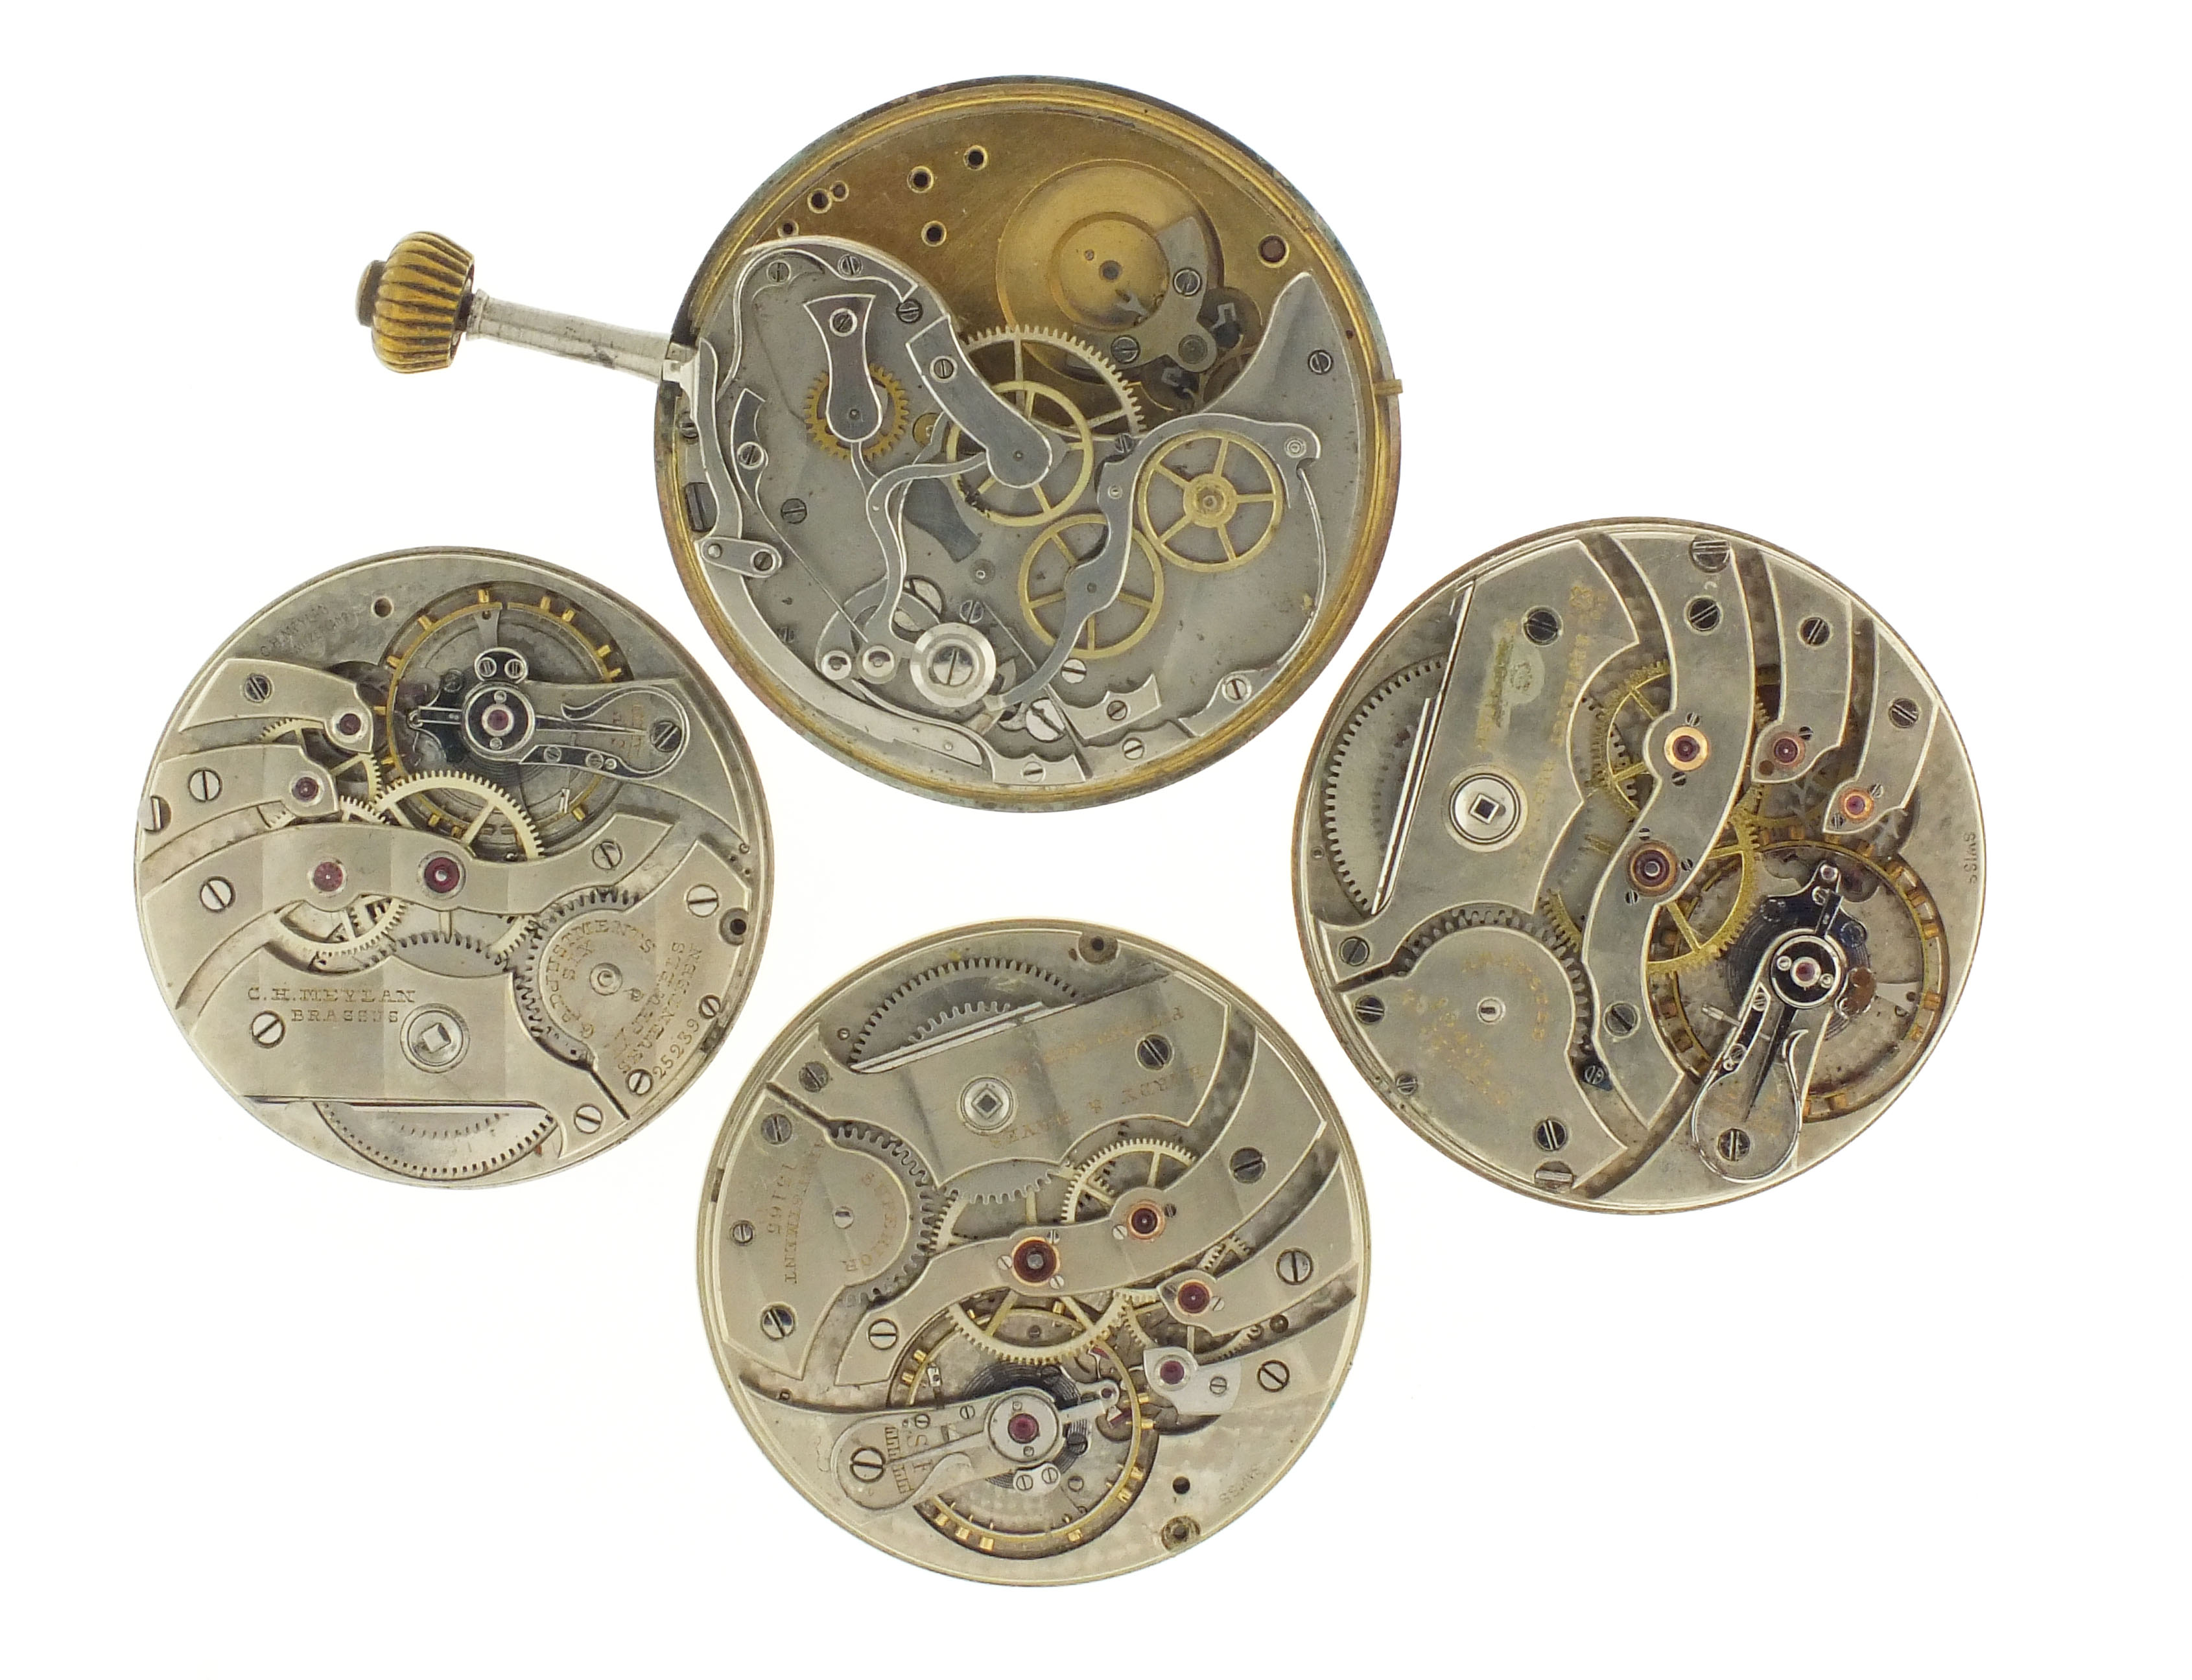 Lot of complicated and high grade pocket watch movements